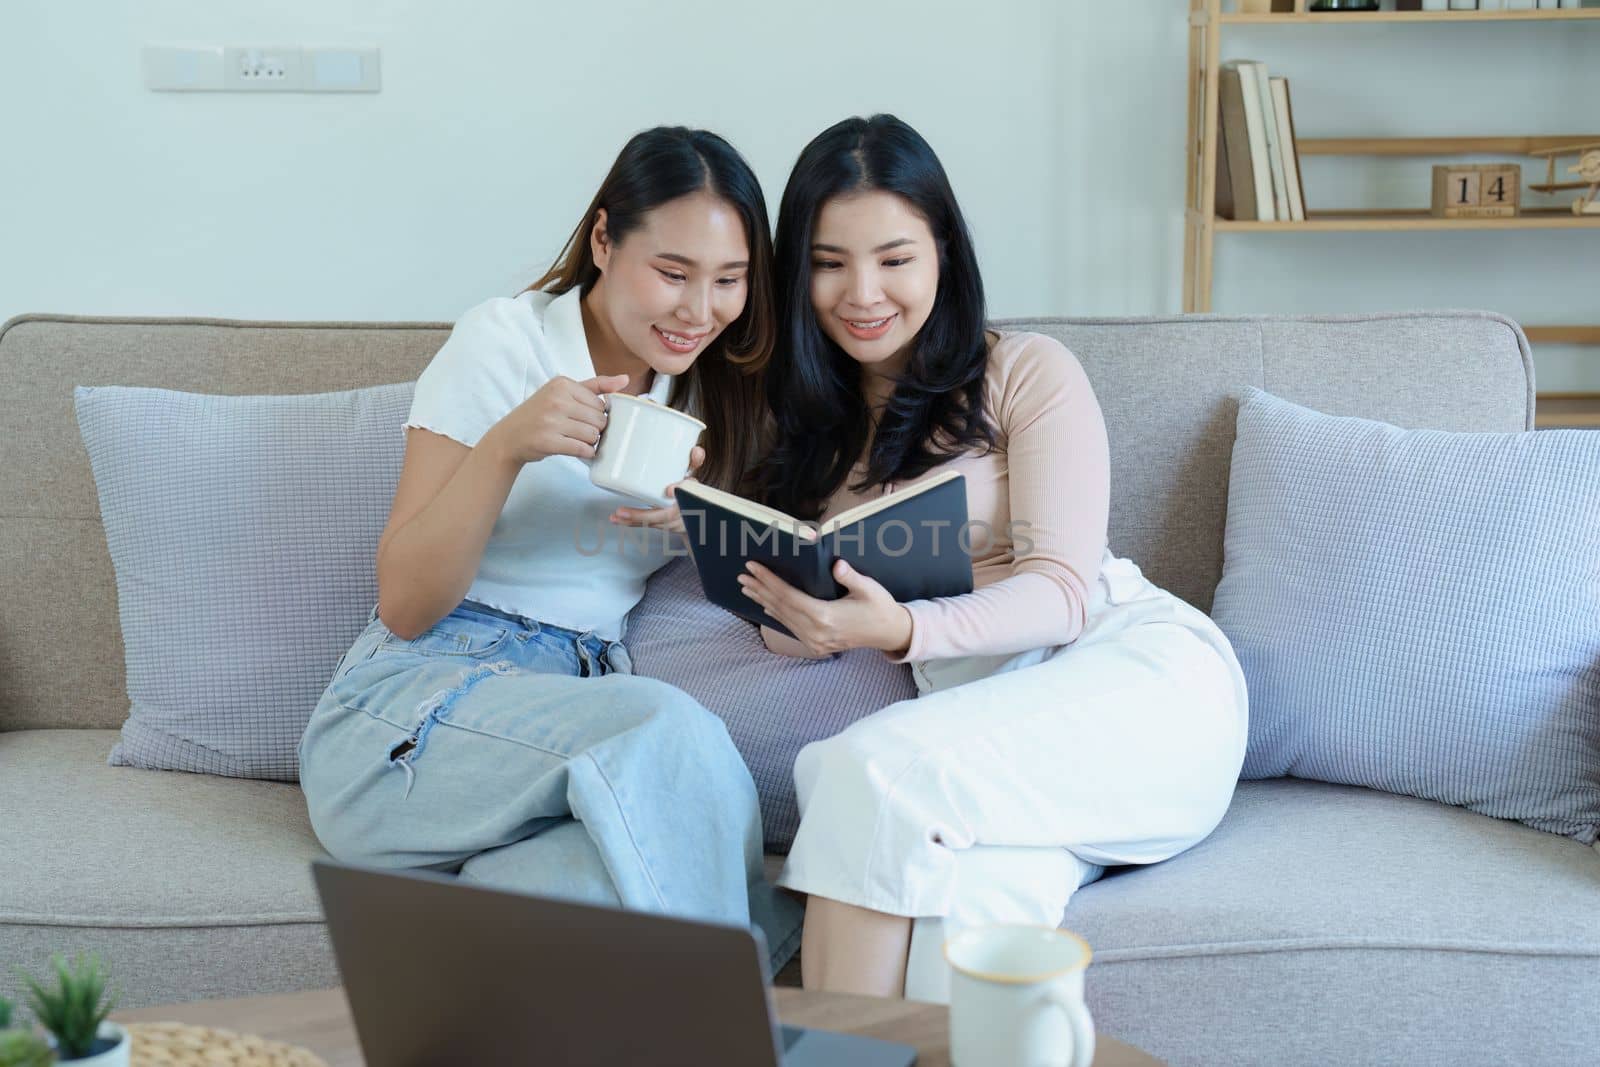 lgbtq, LGBT concept, homosexuality, portrait of two Asian women posing happy together and showing love for each other while having coffee at the dining table.